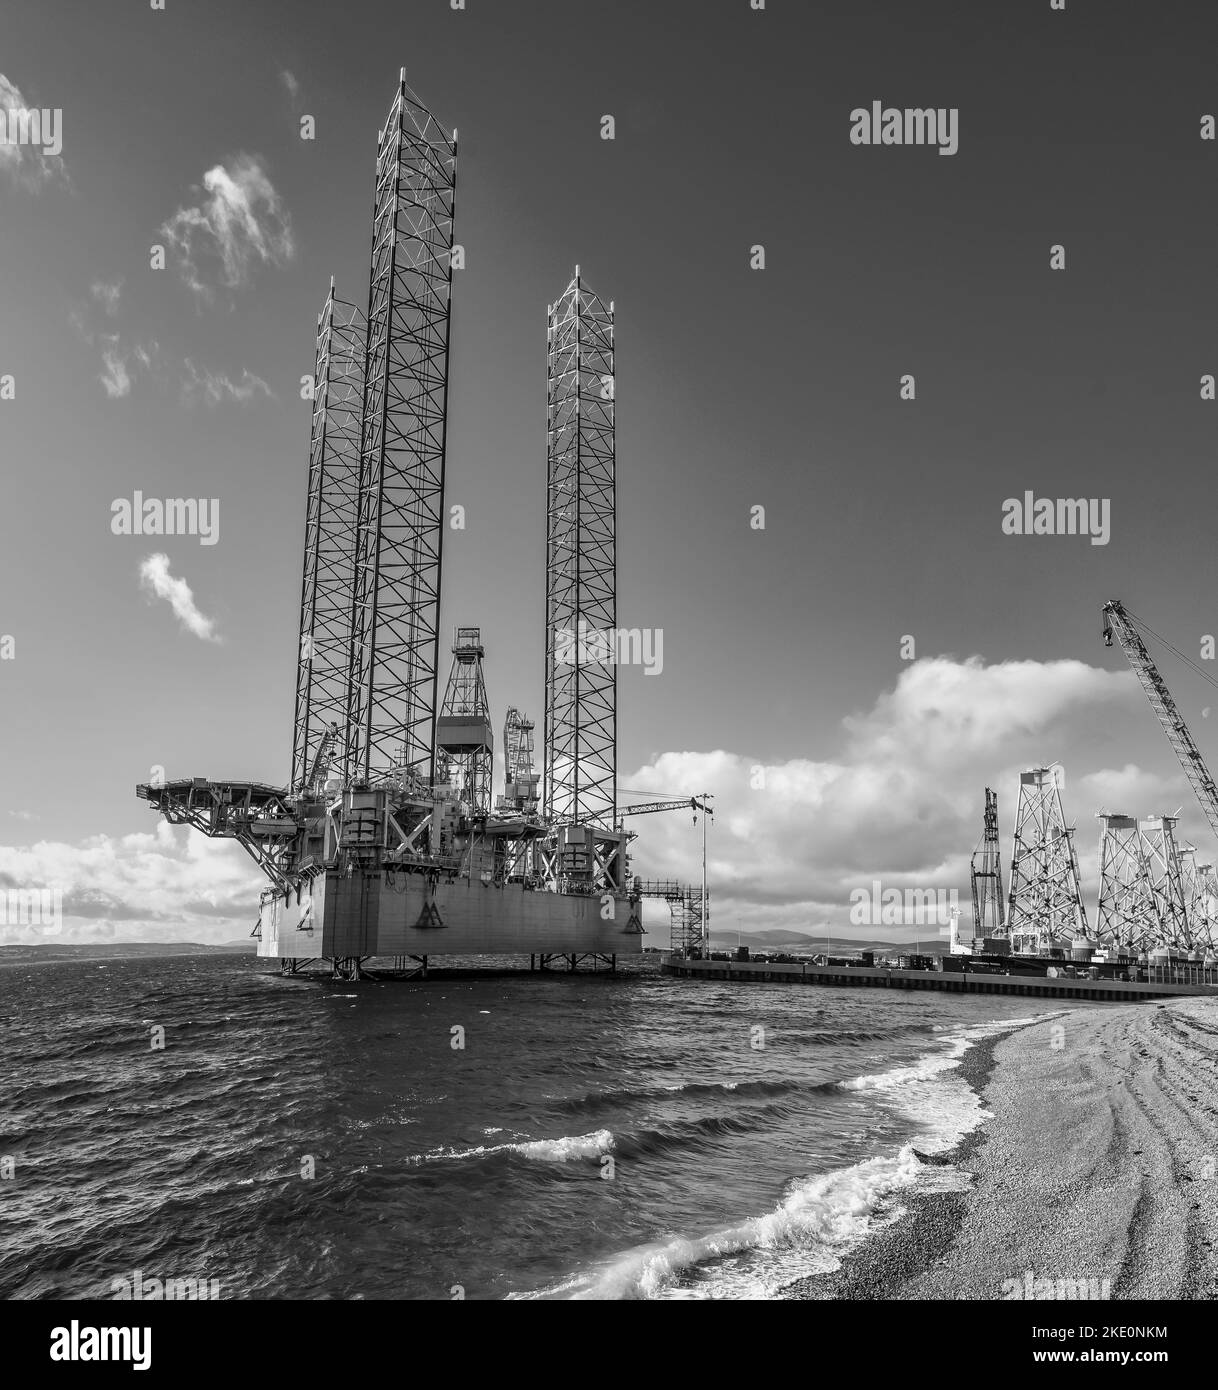 The image is of the gas exploration rig in the repair yard at Nigg Terminal at Nigg on the Nigg Peninsula in Caithness Stock Photo